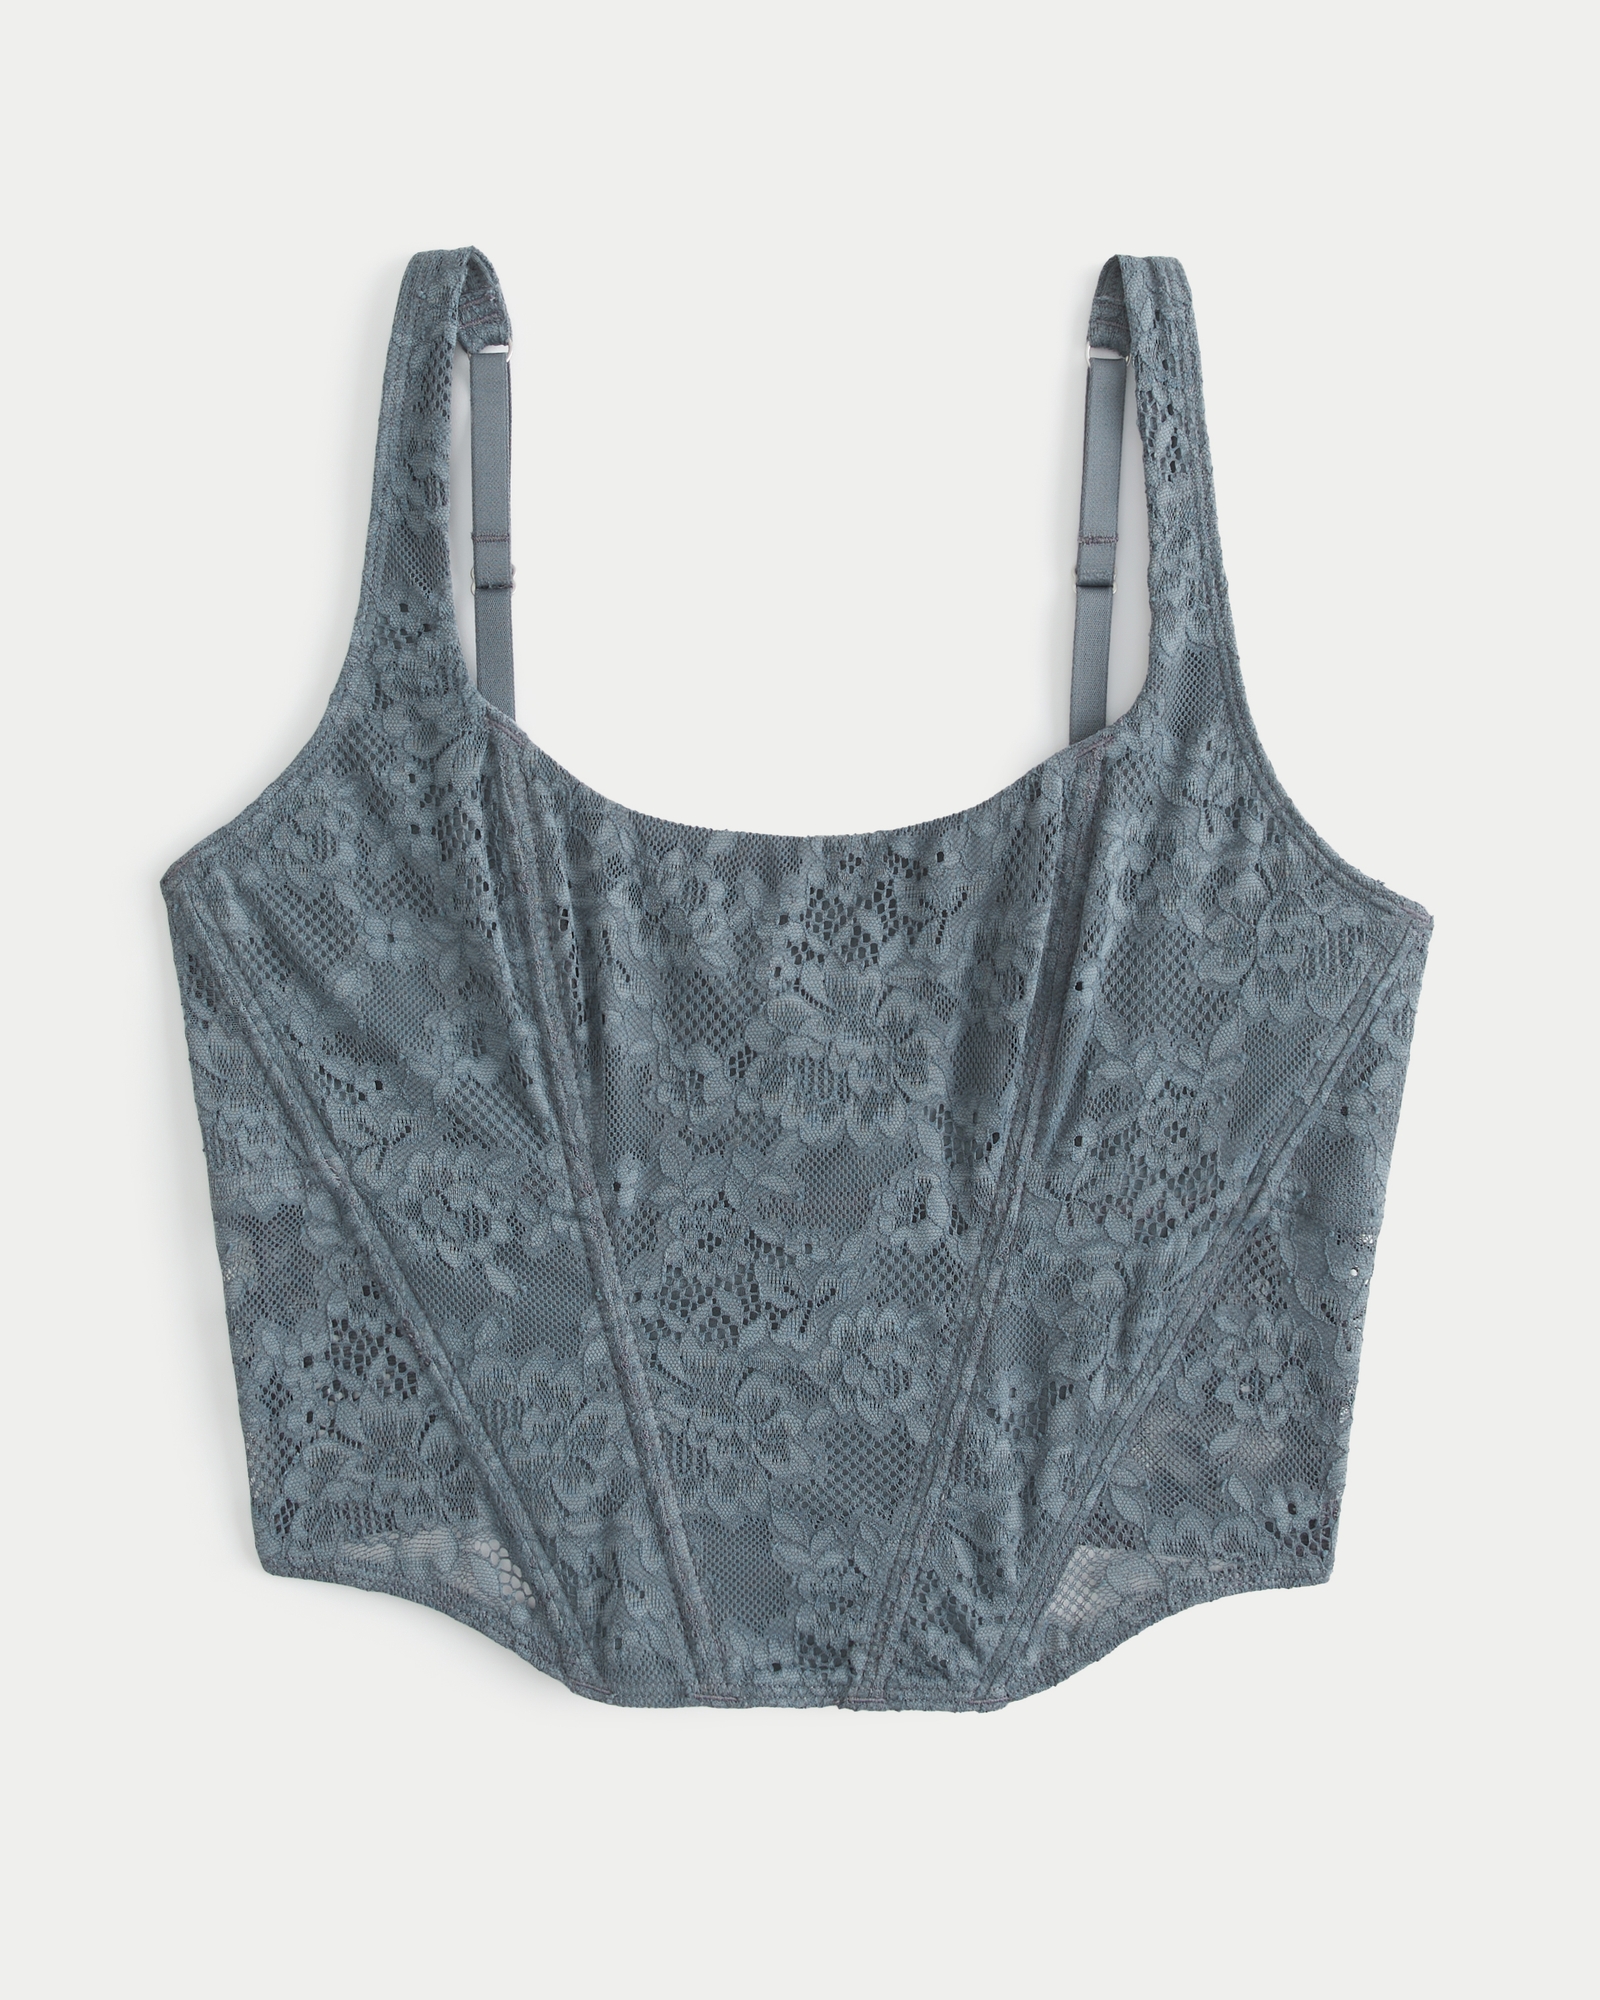 Hollister Gilly Hicks Lace Corset